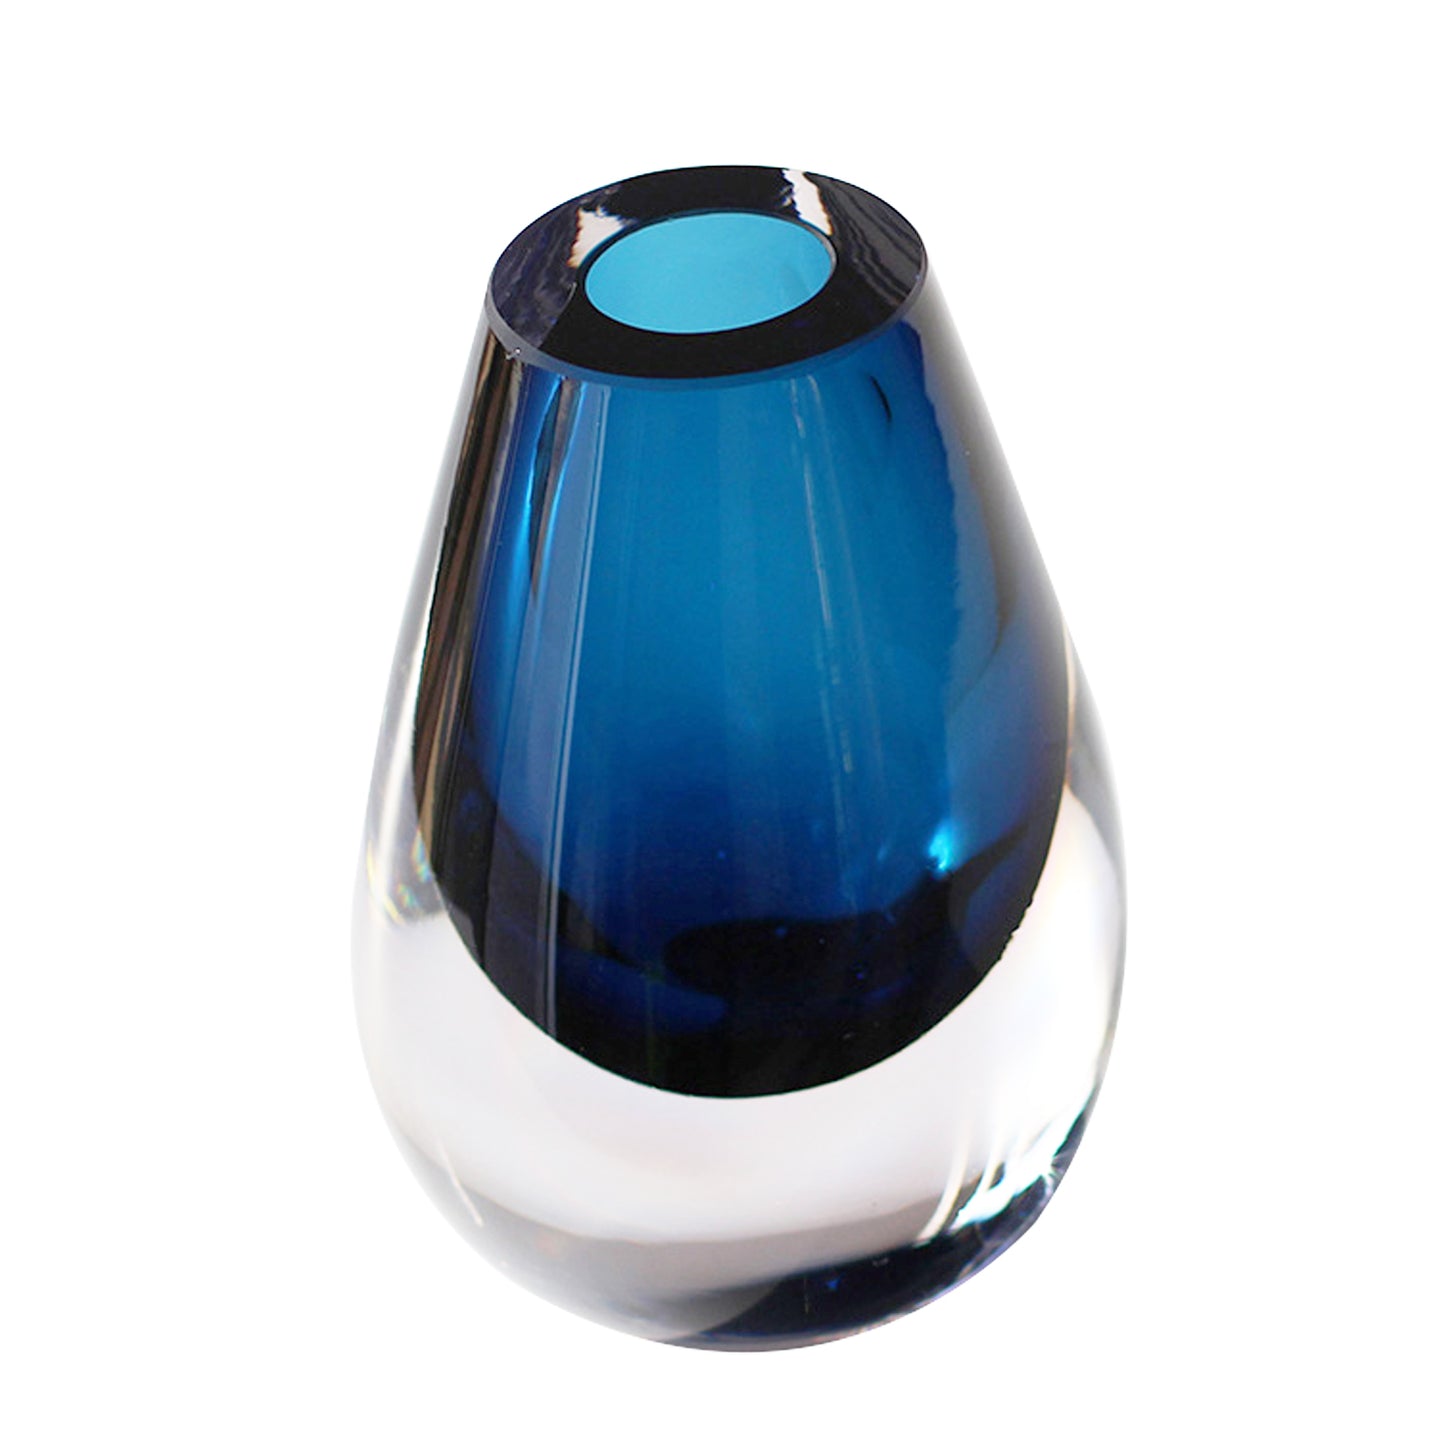 Drop Royal Blue Vase - 15 x 10.9 x 8 cm  - Mouth-Blown Thick Glass - Sustainable Elegance